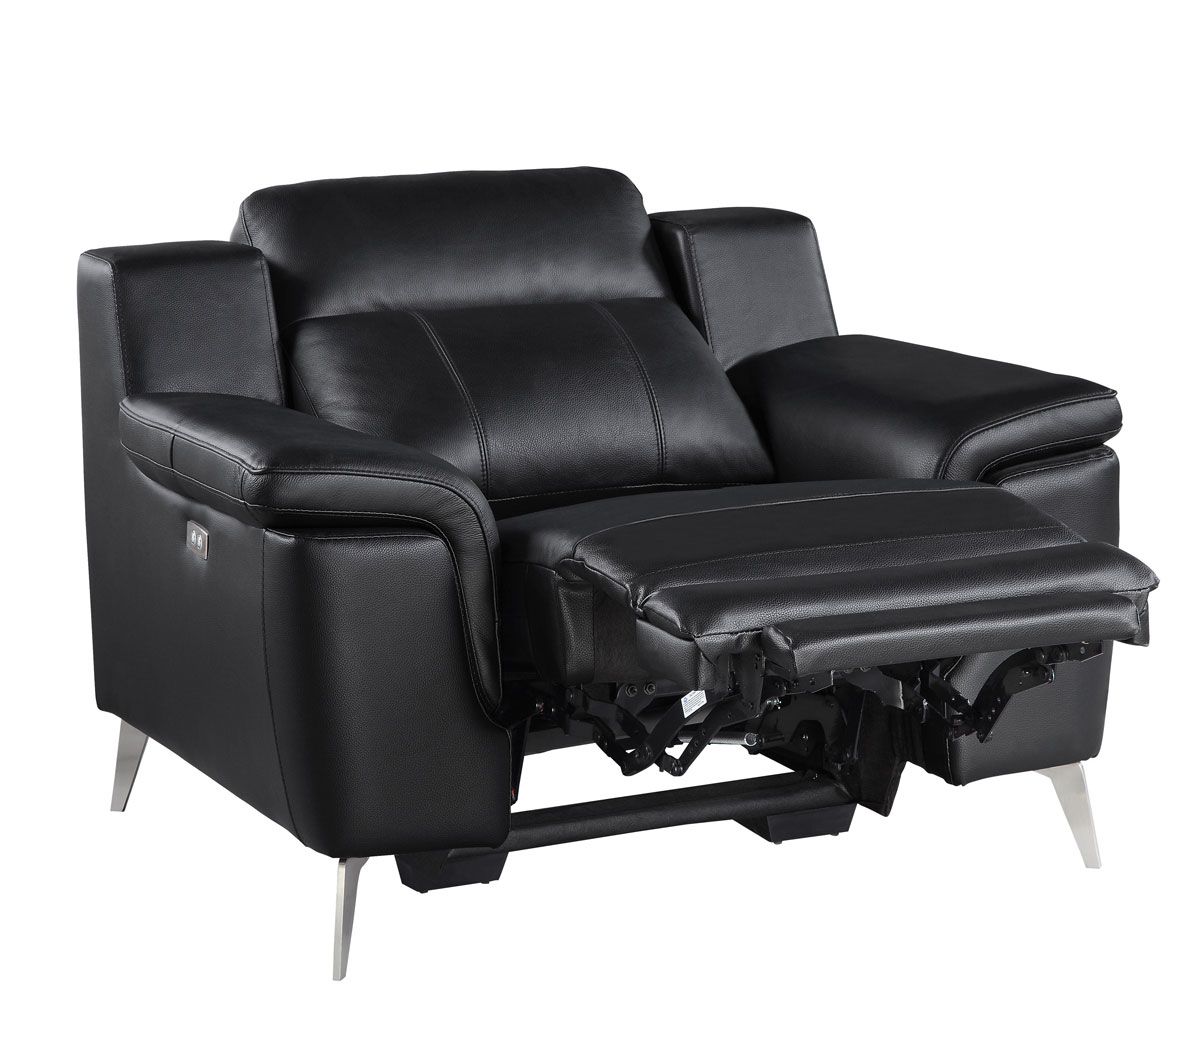 Ludovik Black Leather Power Recliner Chair Open